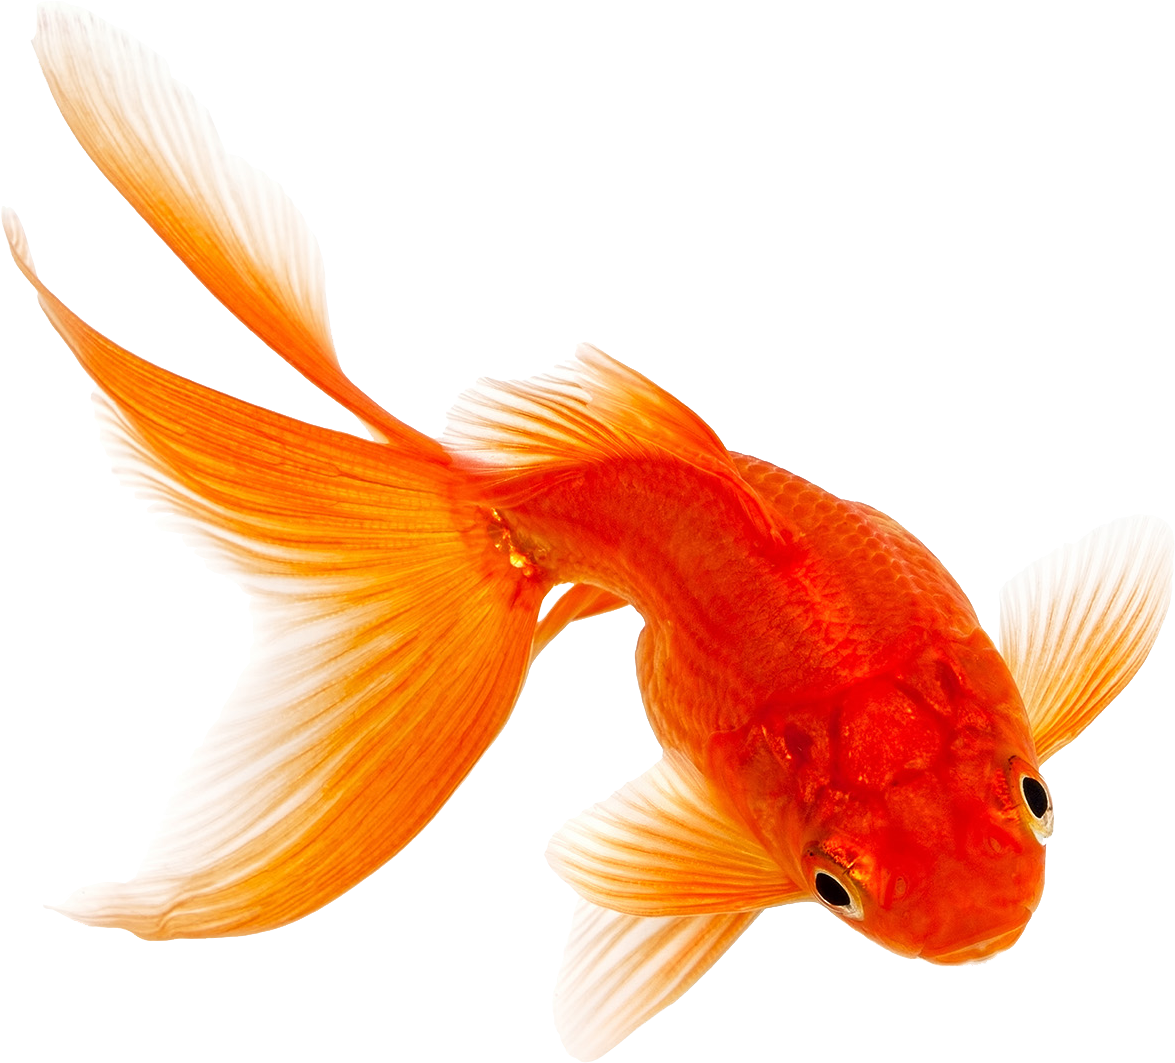 Freshwater And Saltwater Fish Food - Goldfish No Background (1500x1125)